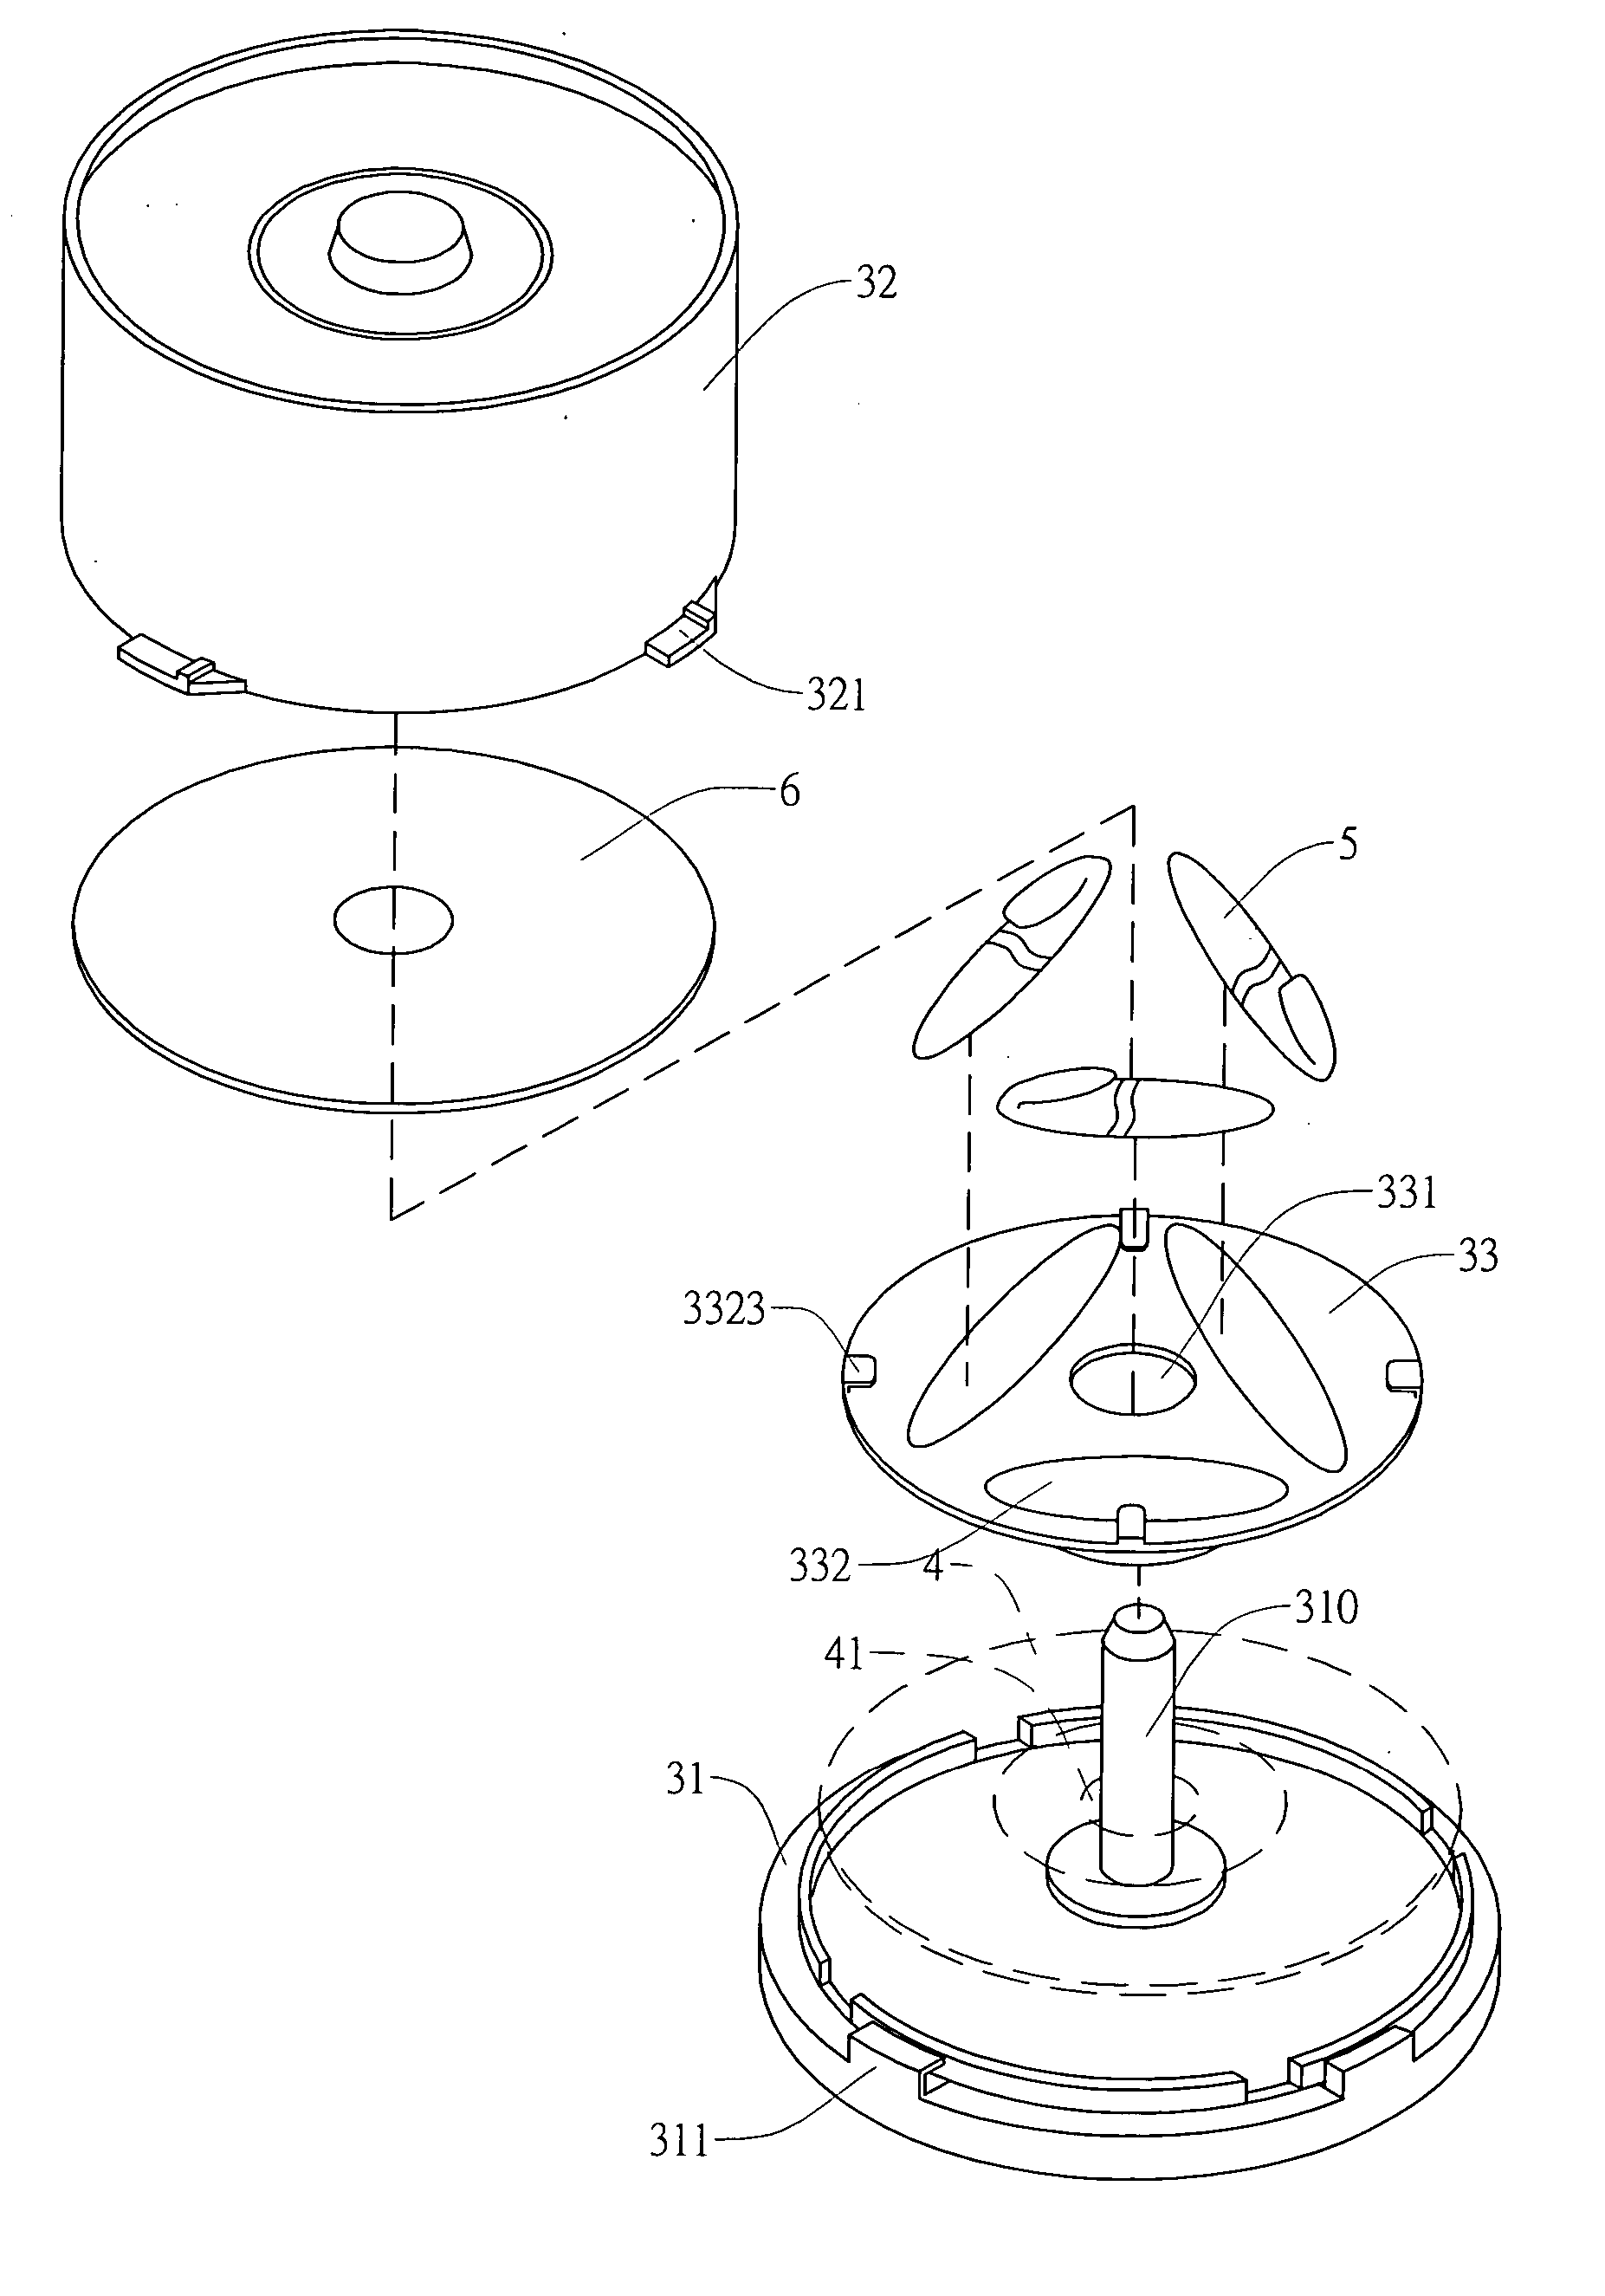 Optical disk container with writing tool holding device